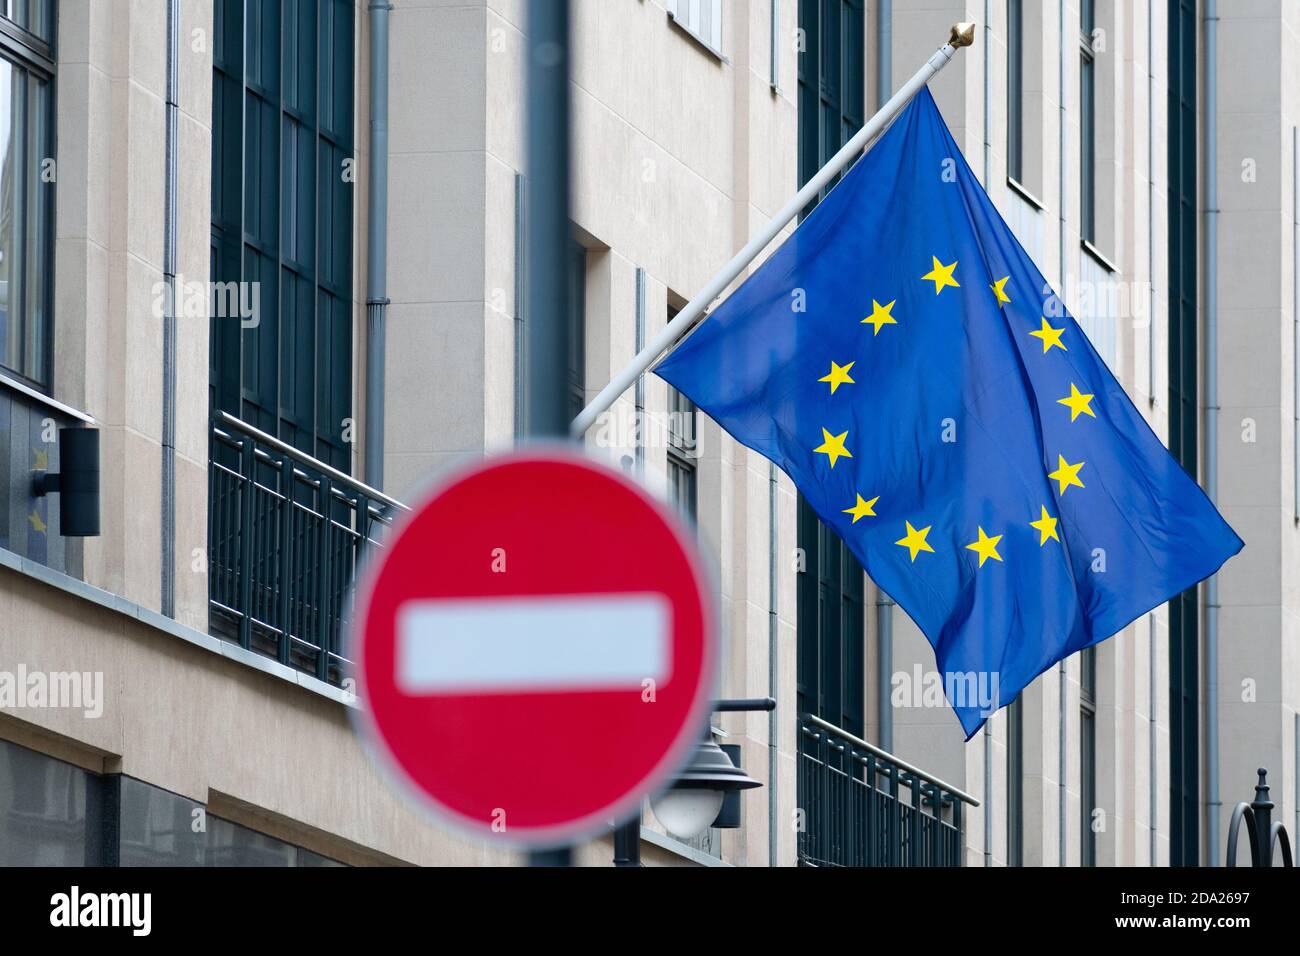 European Union flag with red and white warning no entry traffic sign, stop, ban sign Stock Photo